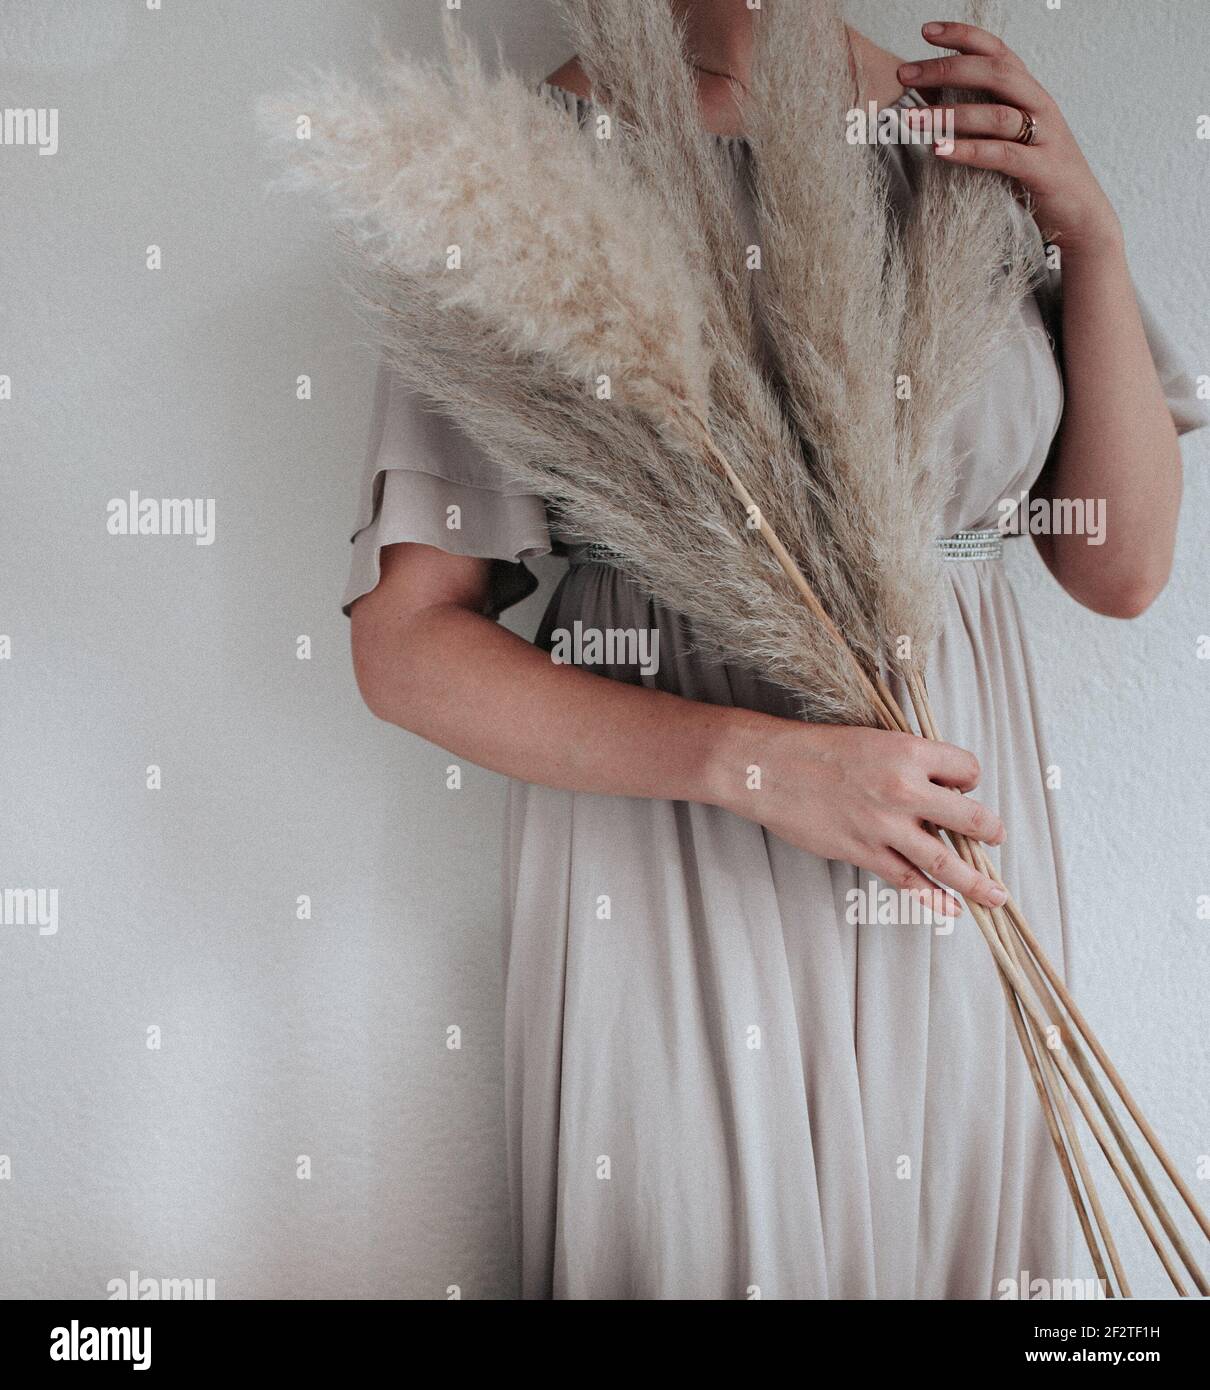 The woman is holding Pampas grass in her had, nordic living or minimalism design Stock Photo